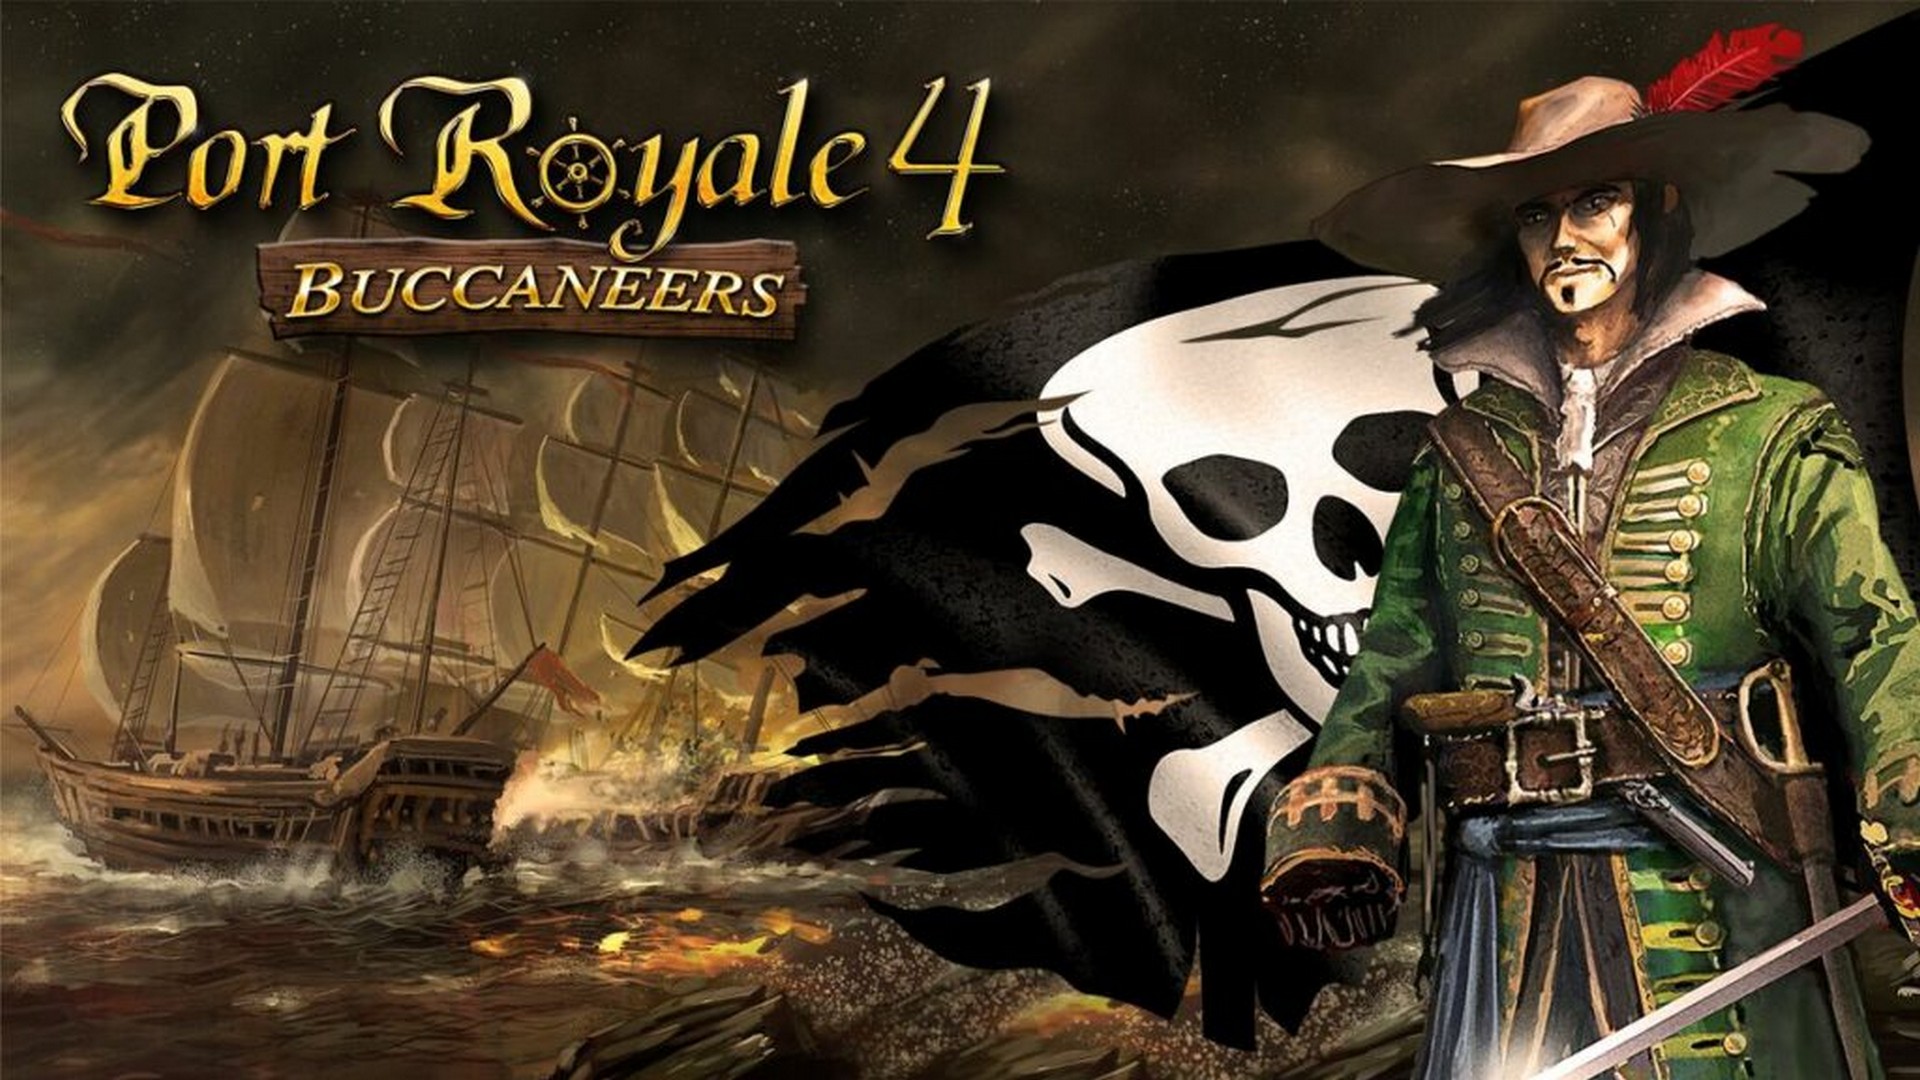 Privateering For All: ‘Buccaneers’ DLC For Port Royale 4 Out Now